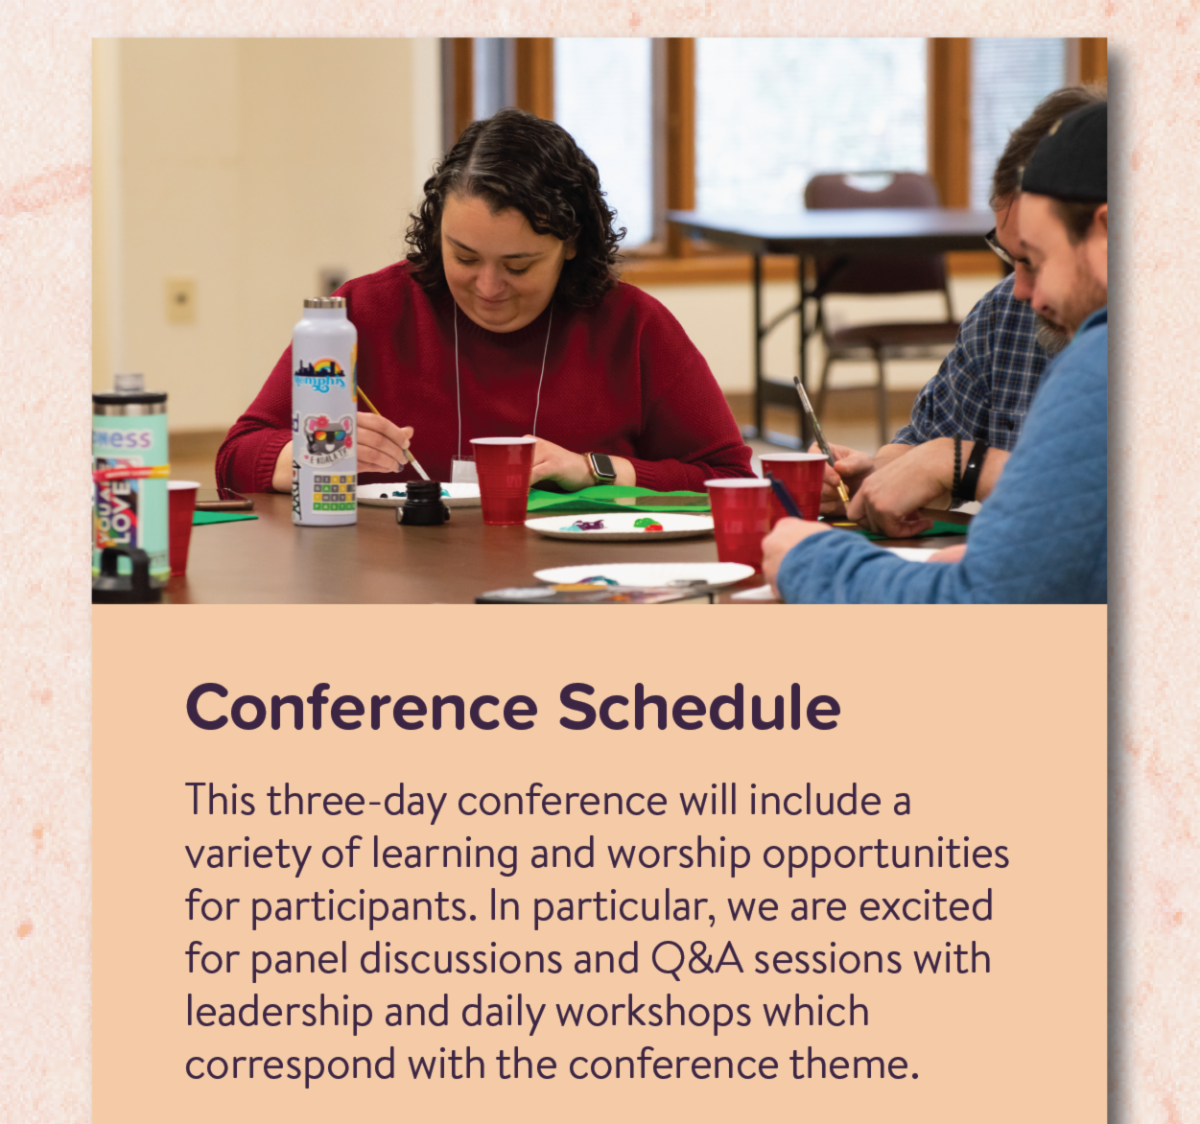 Conference Schedule - This three-day conference will include a variety of learning and worship opportunities for participants. In particular, we are excited for panel discussions and Q&A sessions with leadership and daily workshops which correspond with the conference theme.  